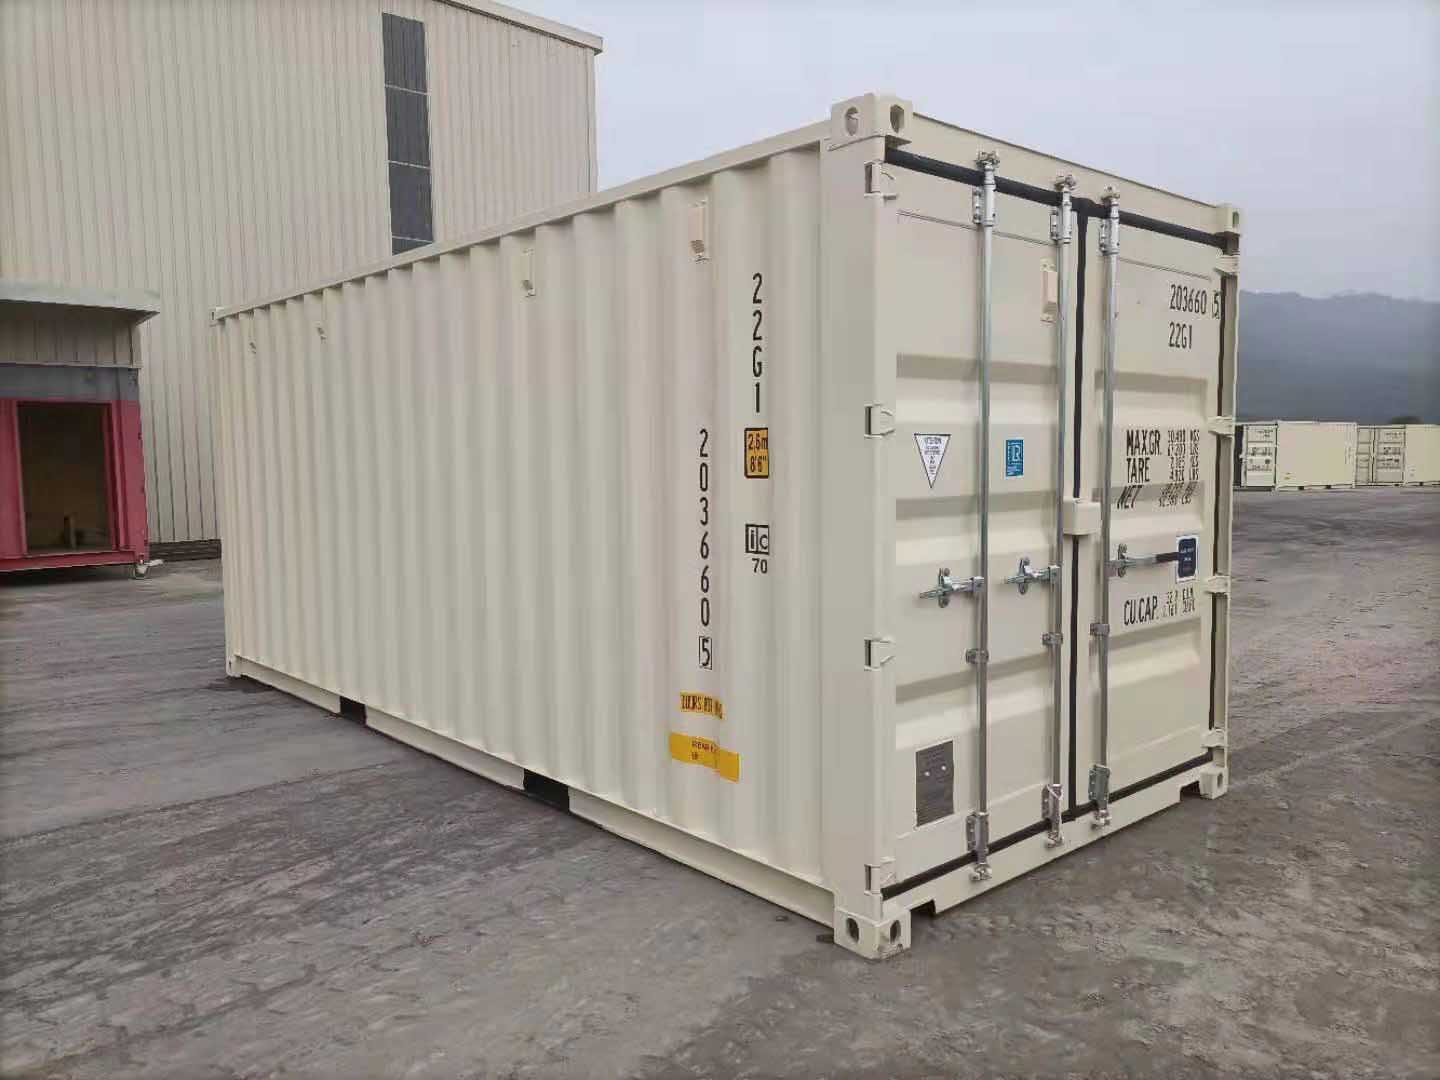 Shipping containers for sale in Chesapeake